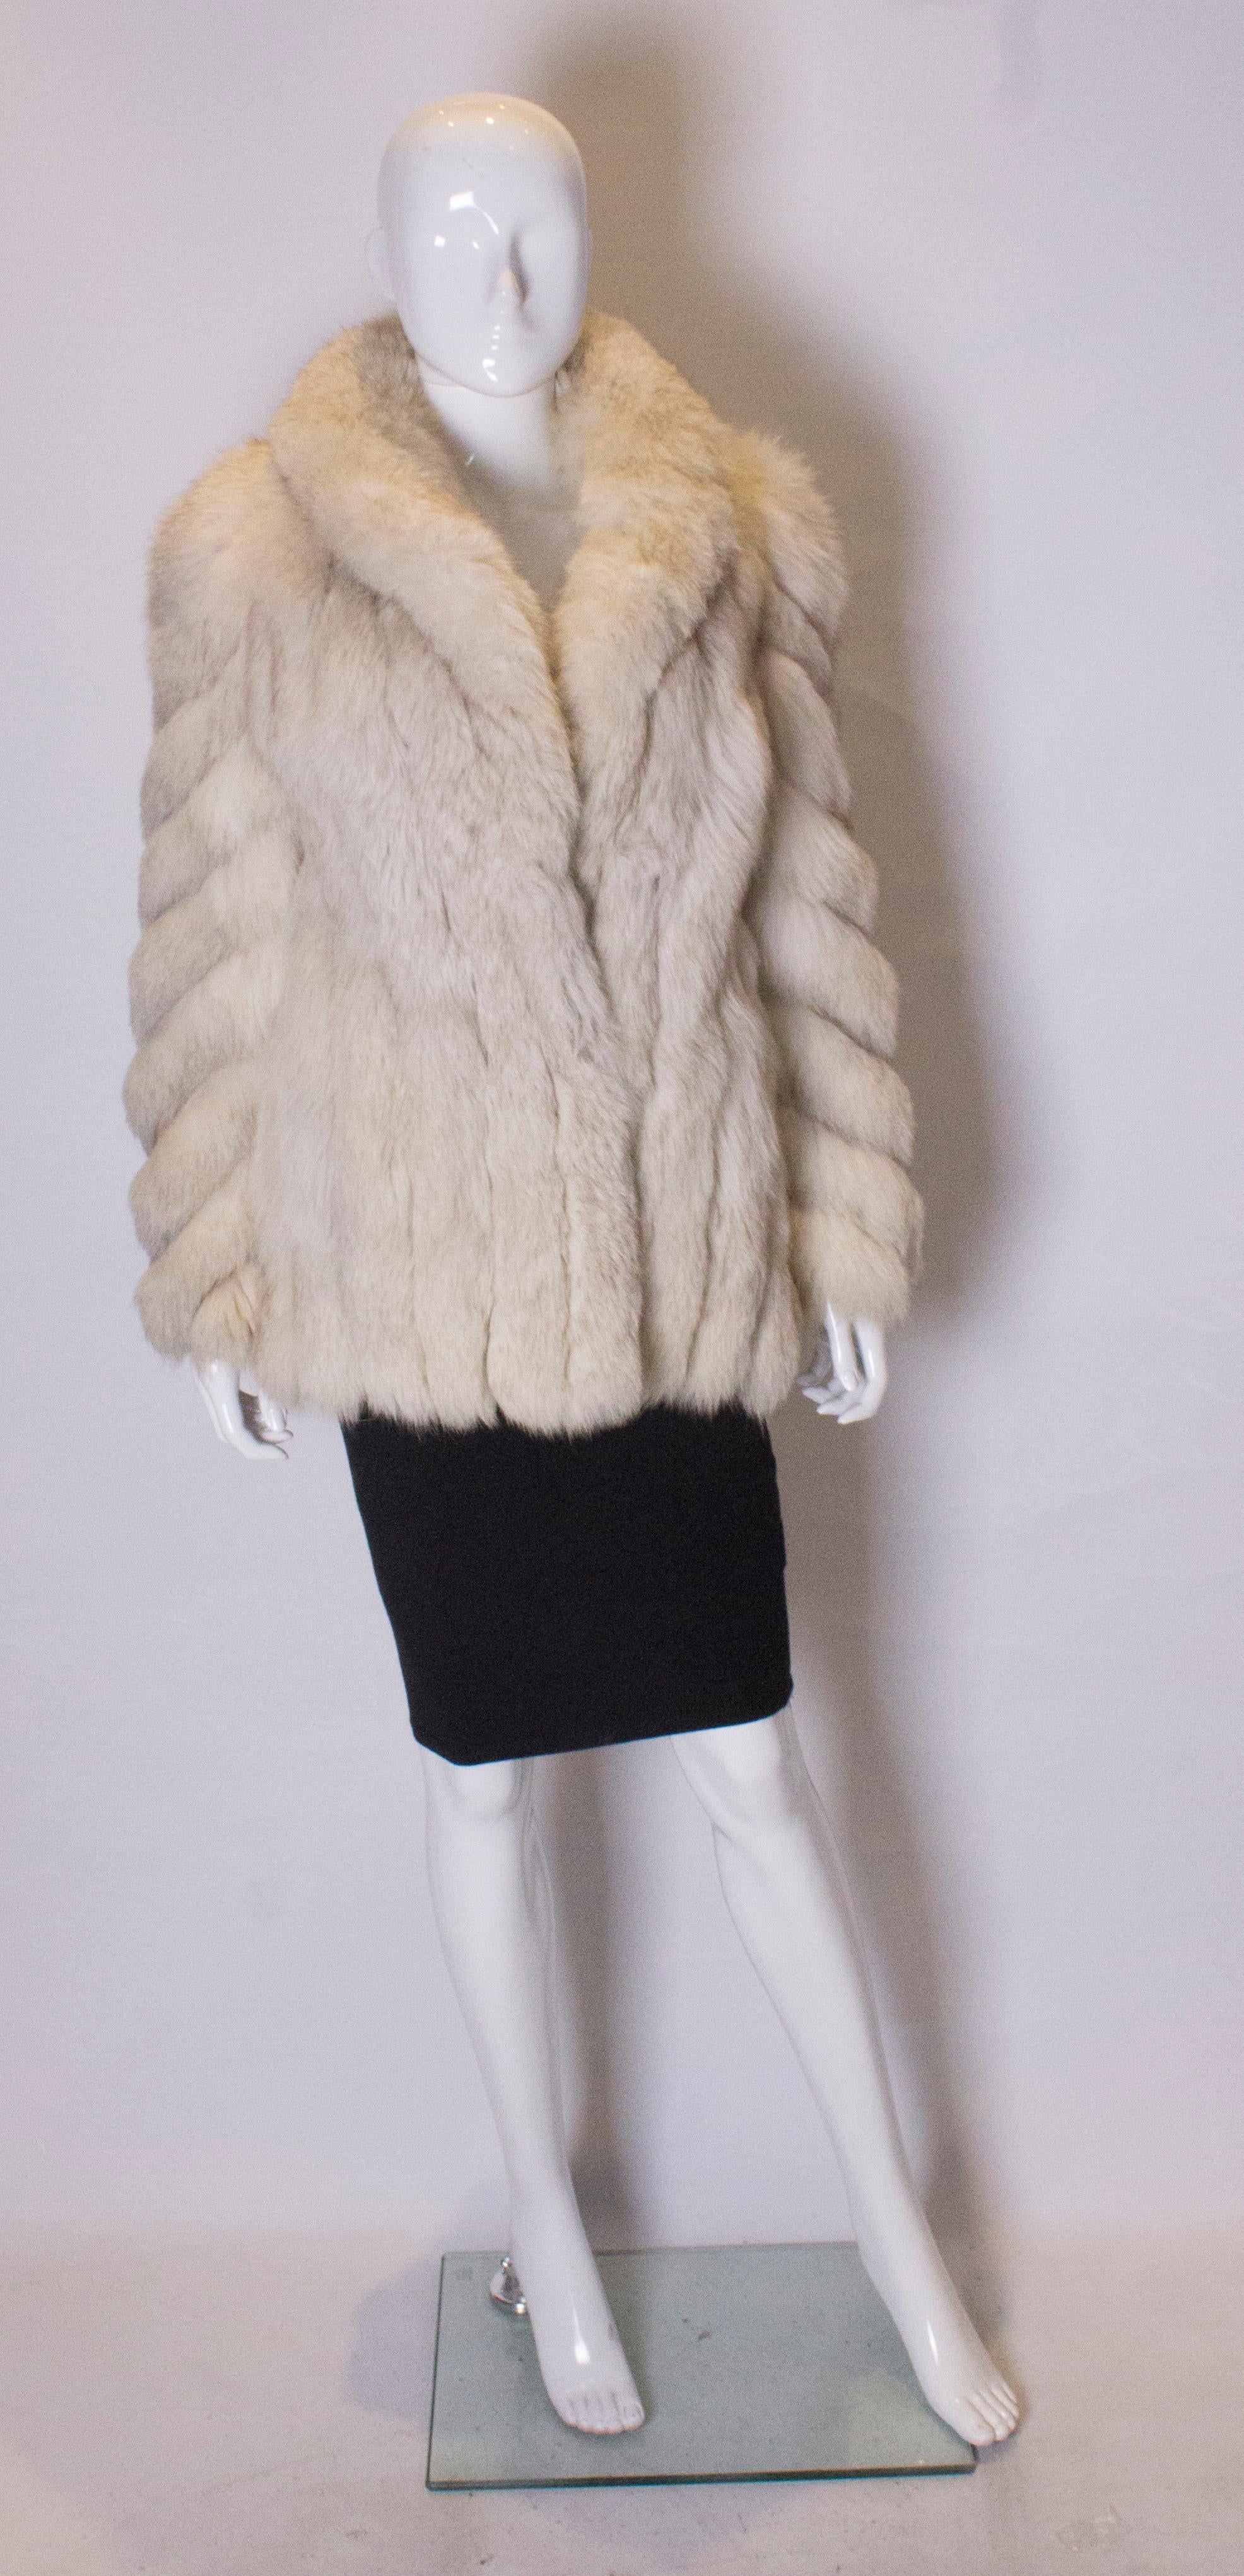 A vintage 1970s artic white fox fur pelted jacket winter coat with two pockets and fastens with two hooks on the front

a UK 8 size small